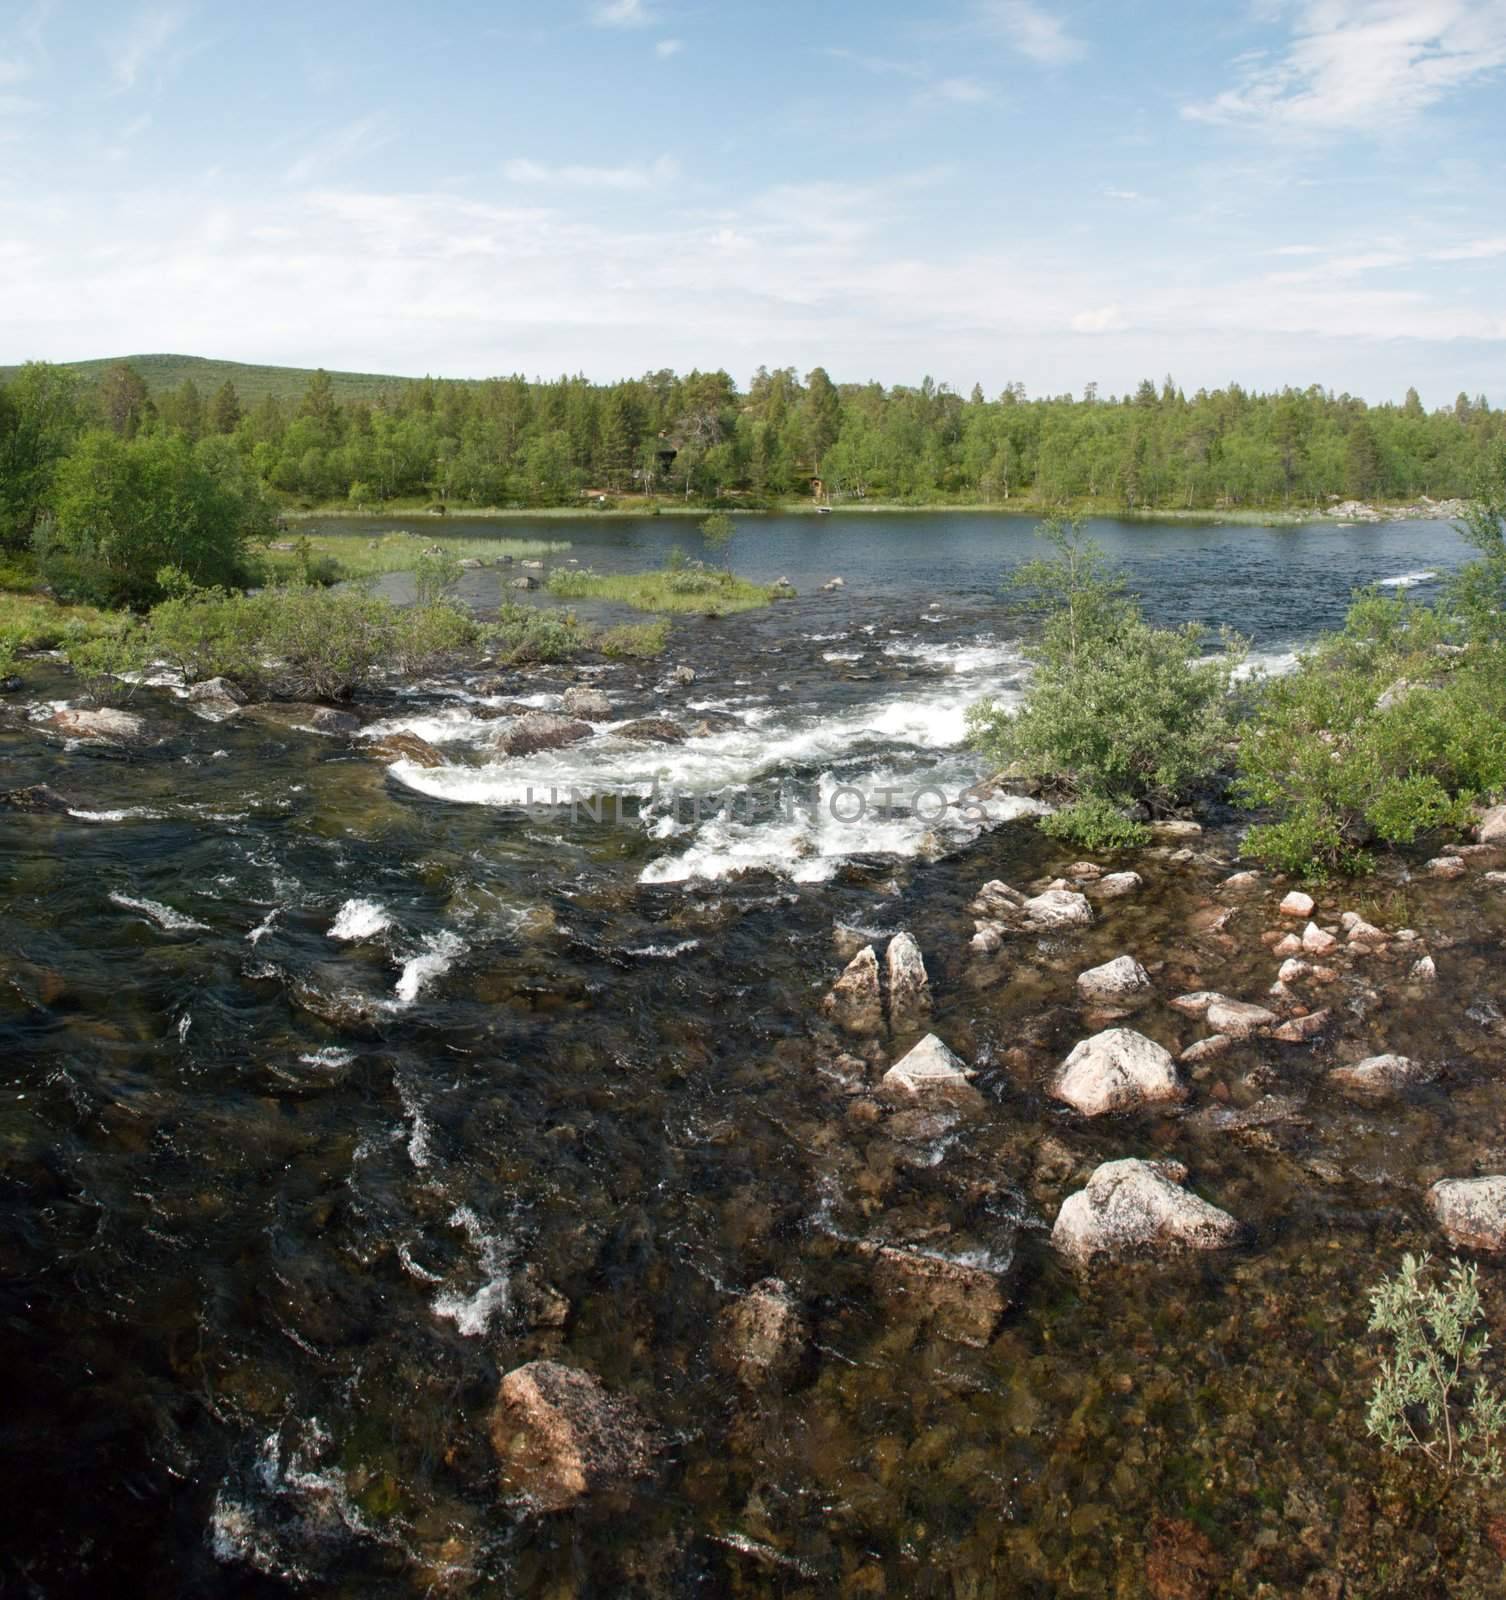 Its a fast stream of a river in finnish Lapland with larger flow surrounded by nordic forest at the background, this bautiful nordic landscape in summer time 